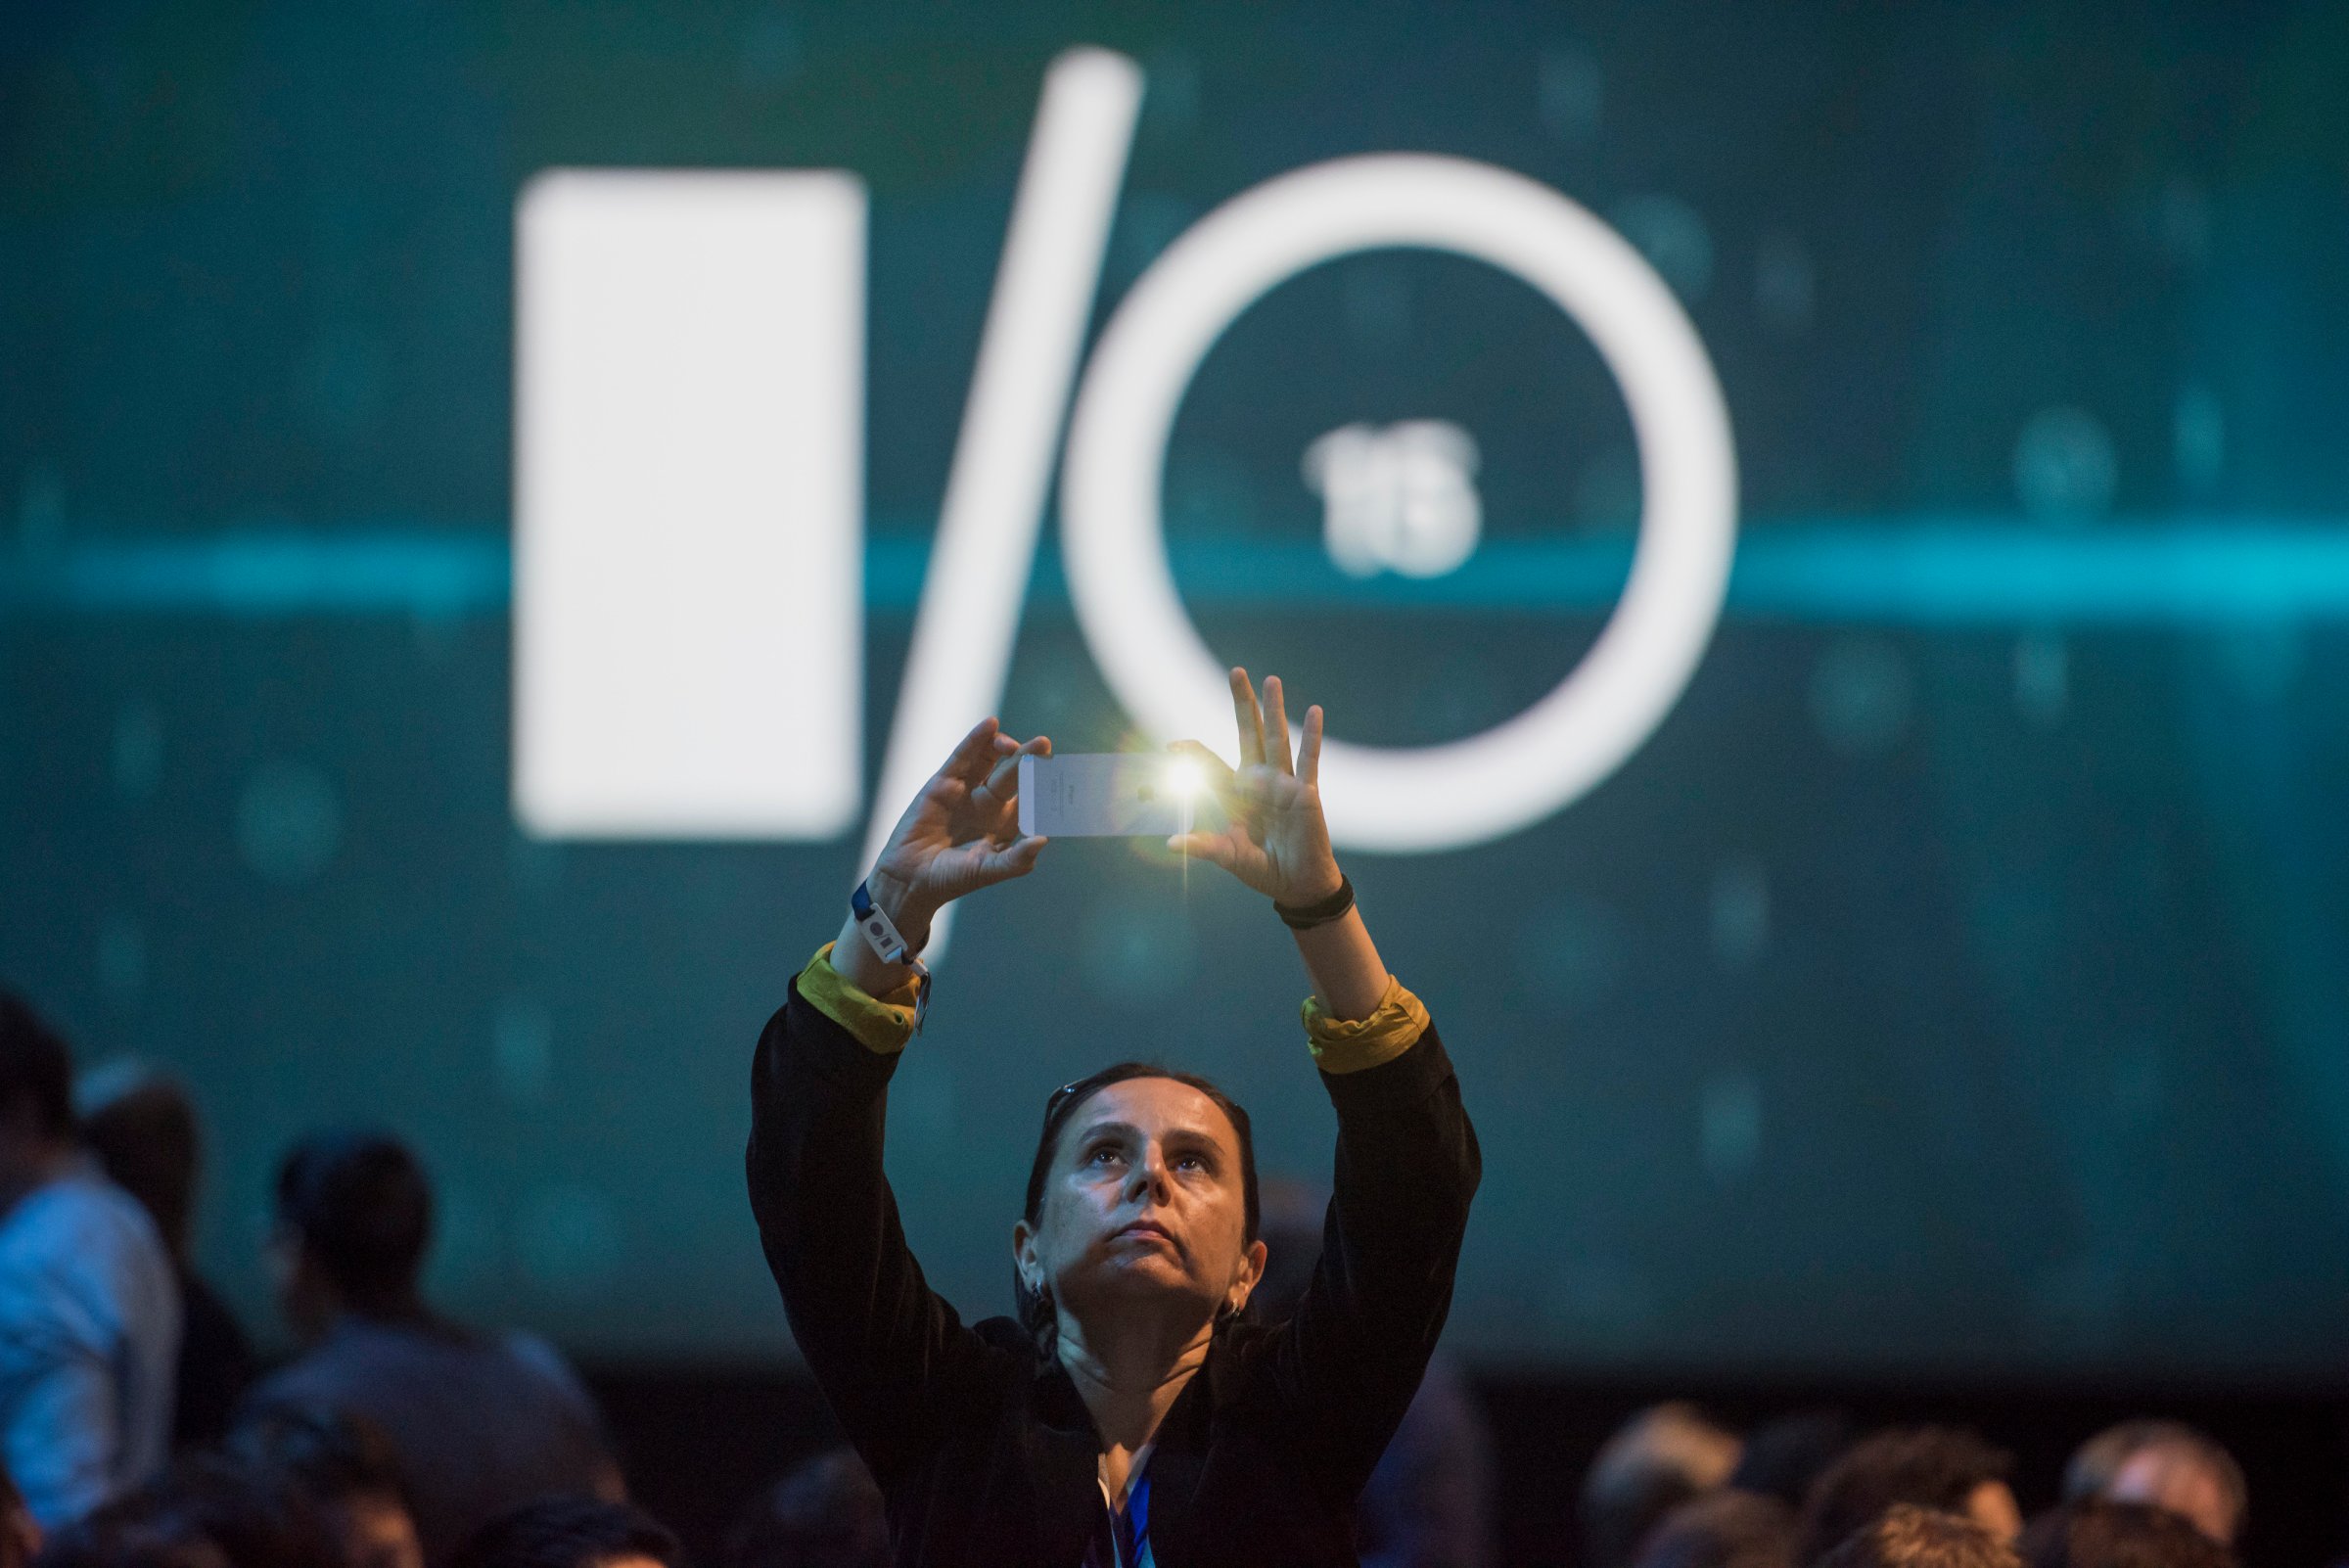 An attendee takes a photograph prior to the Google I/O Annual Developers Conference in San Francisco, California, U.S., on Thursday, May 28, 2014. Google Inc. executives are taking the stage this week to talk about a plethora of new technologies, including automobiles, home automation, digital TV, Web-connected devices and a new version of Android. Photographer: David Paul Morris/Bloomberg